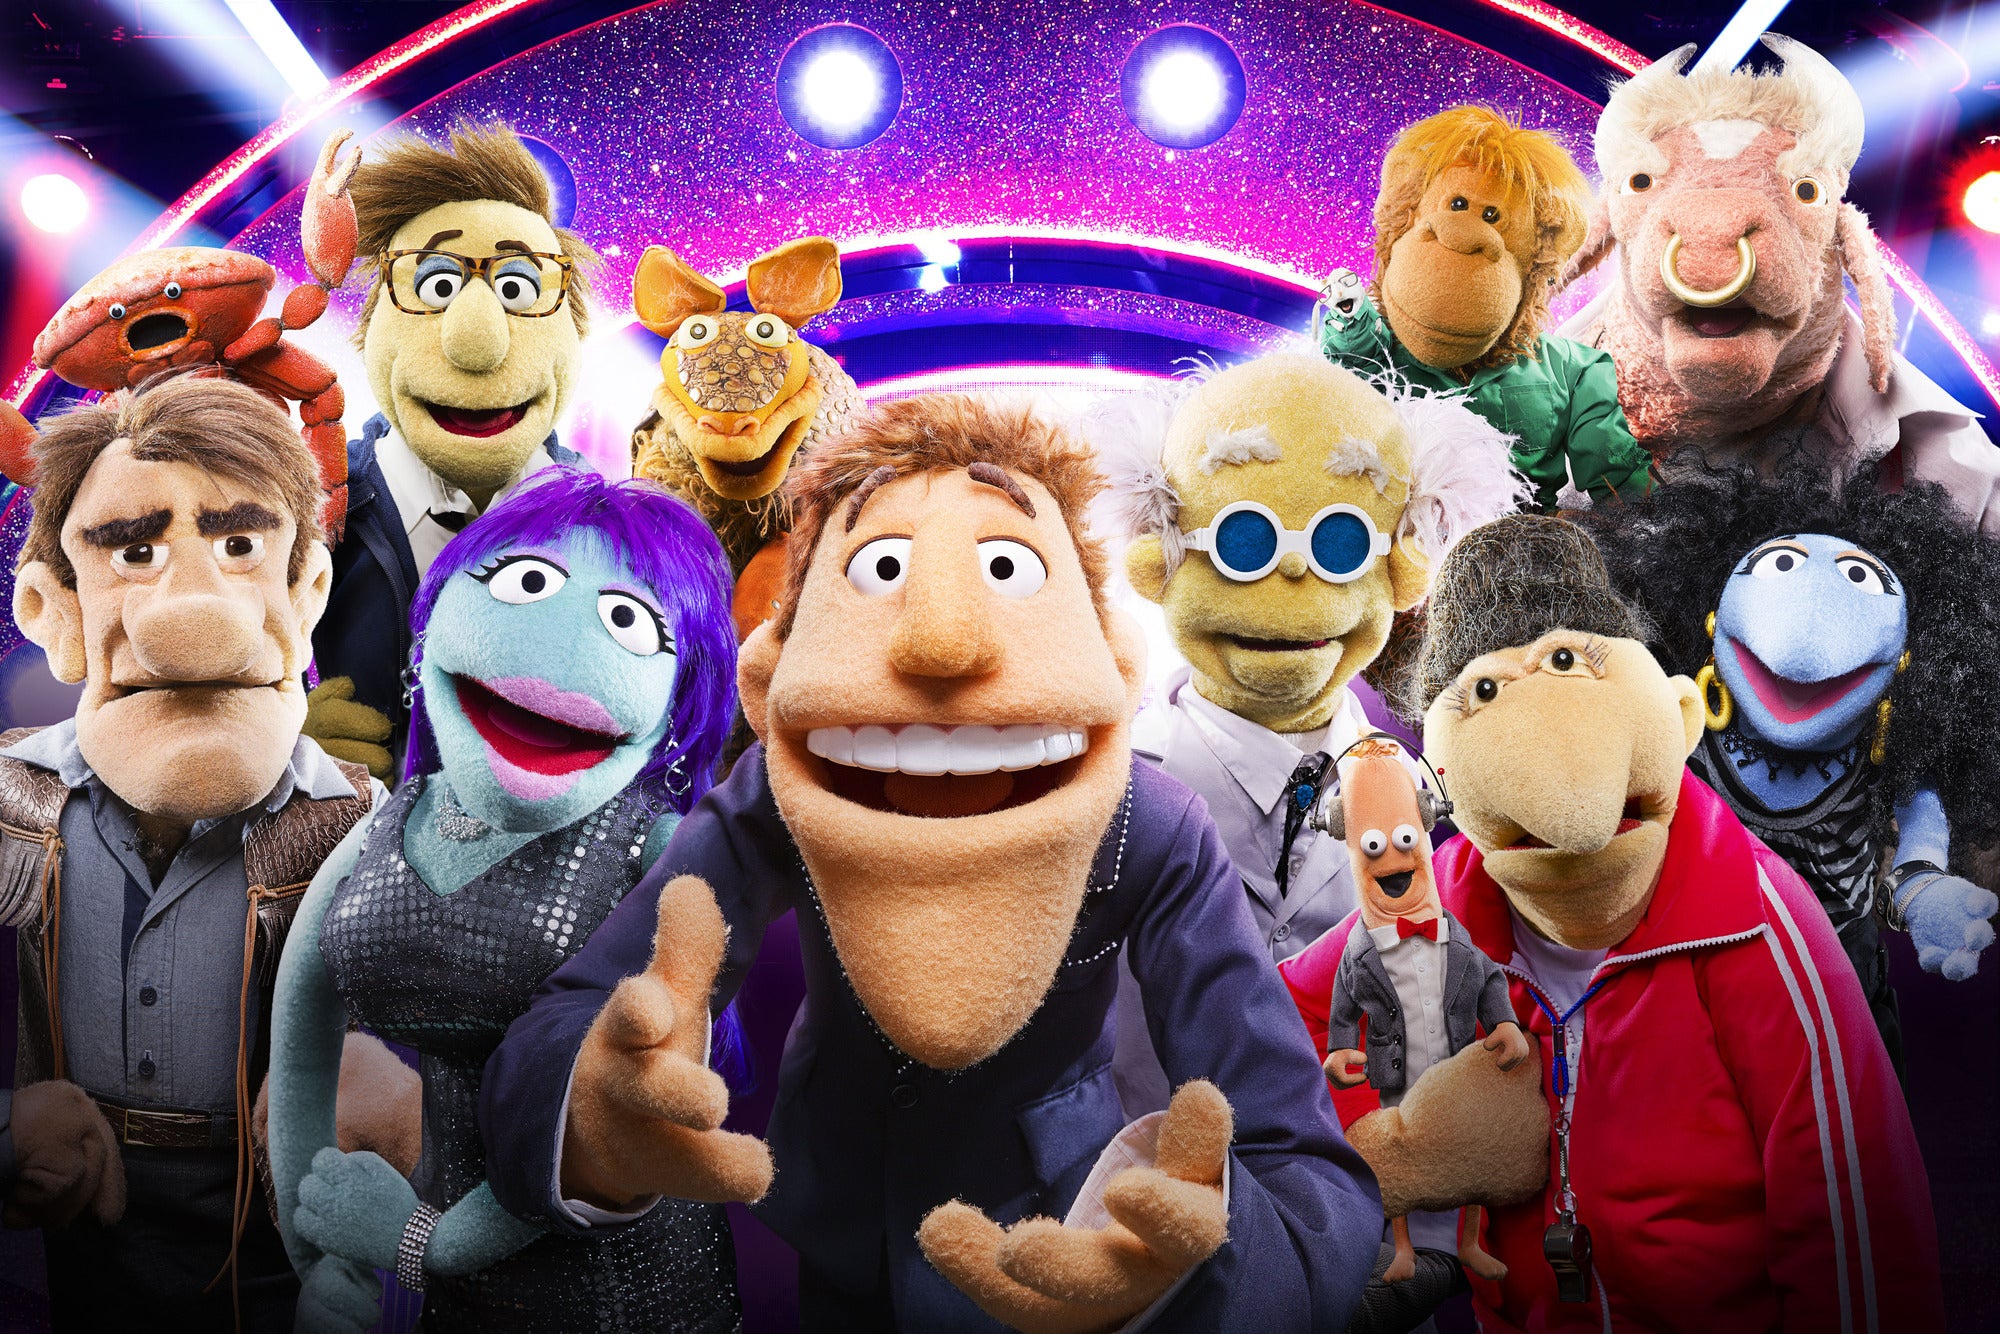 Move over Miss Piggy: New generation of 'Muppets' take over BBC1 for